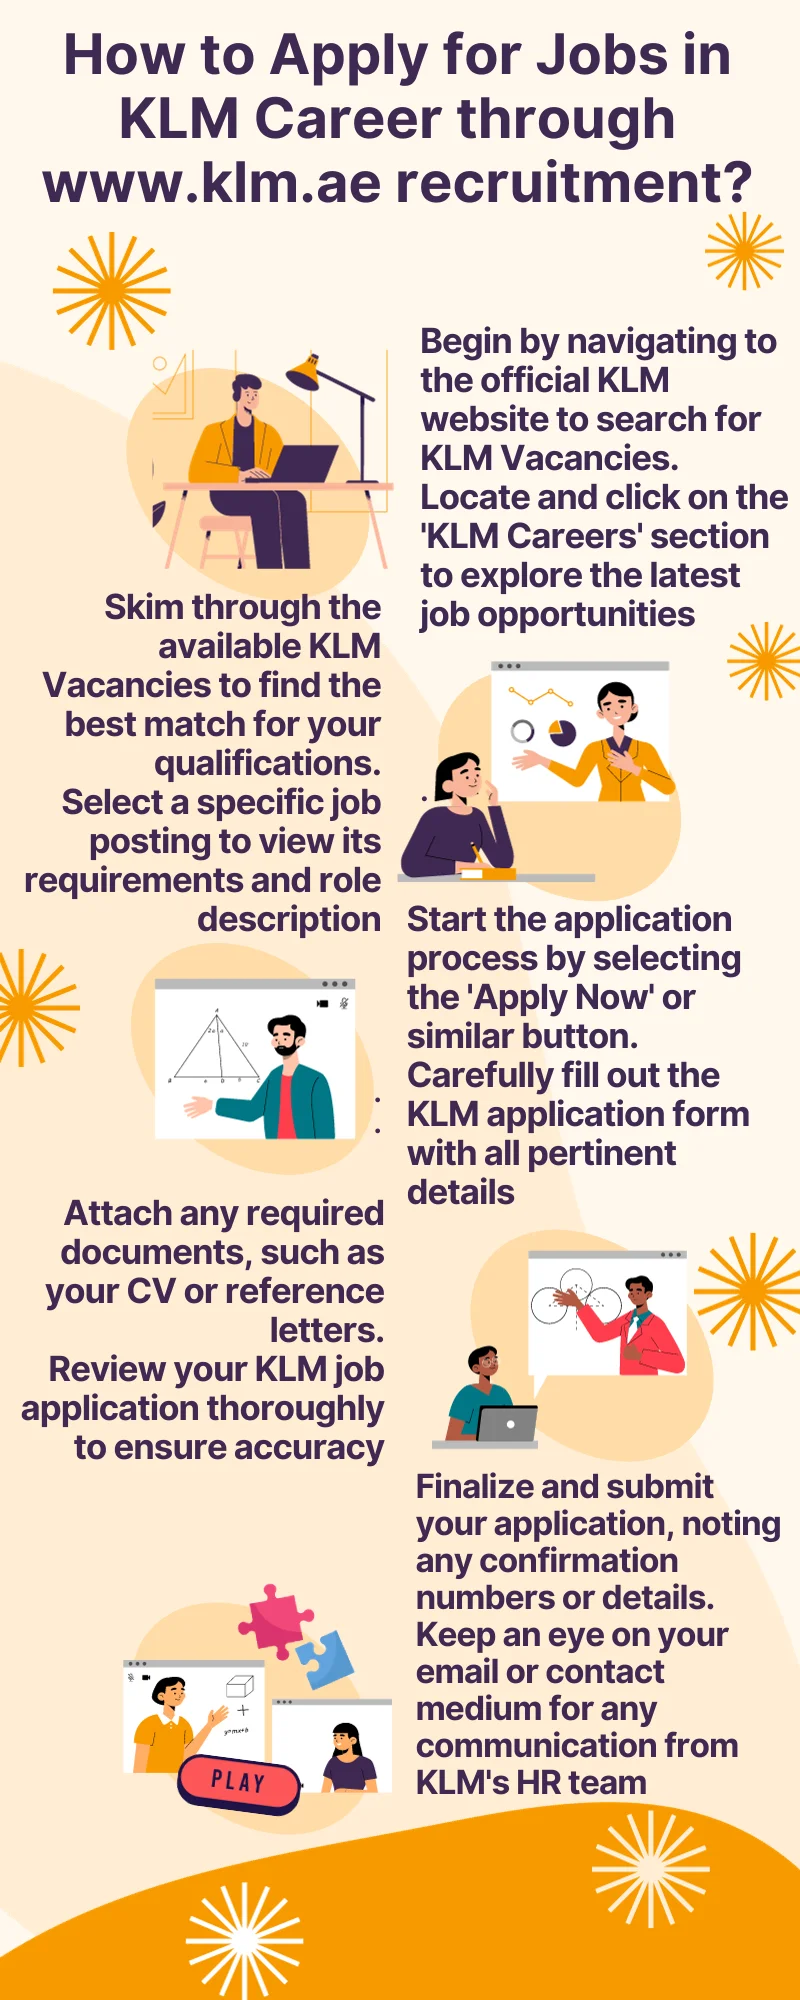 How to Apply for Jobs in KLM Career through www.klm.ae recruitment?